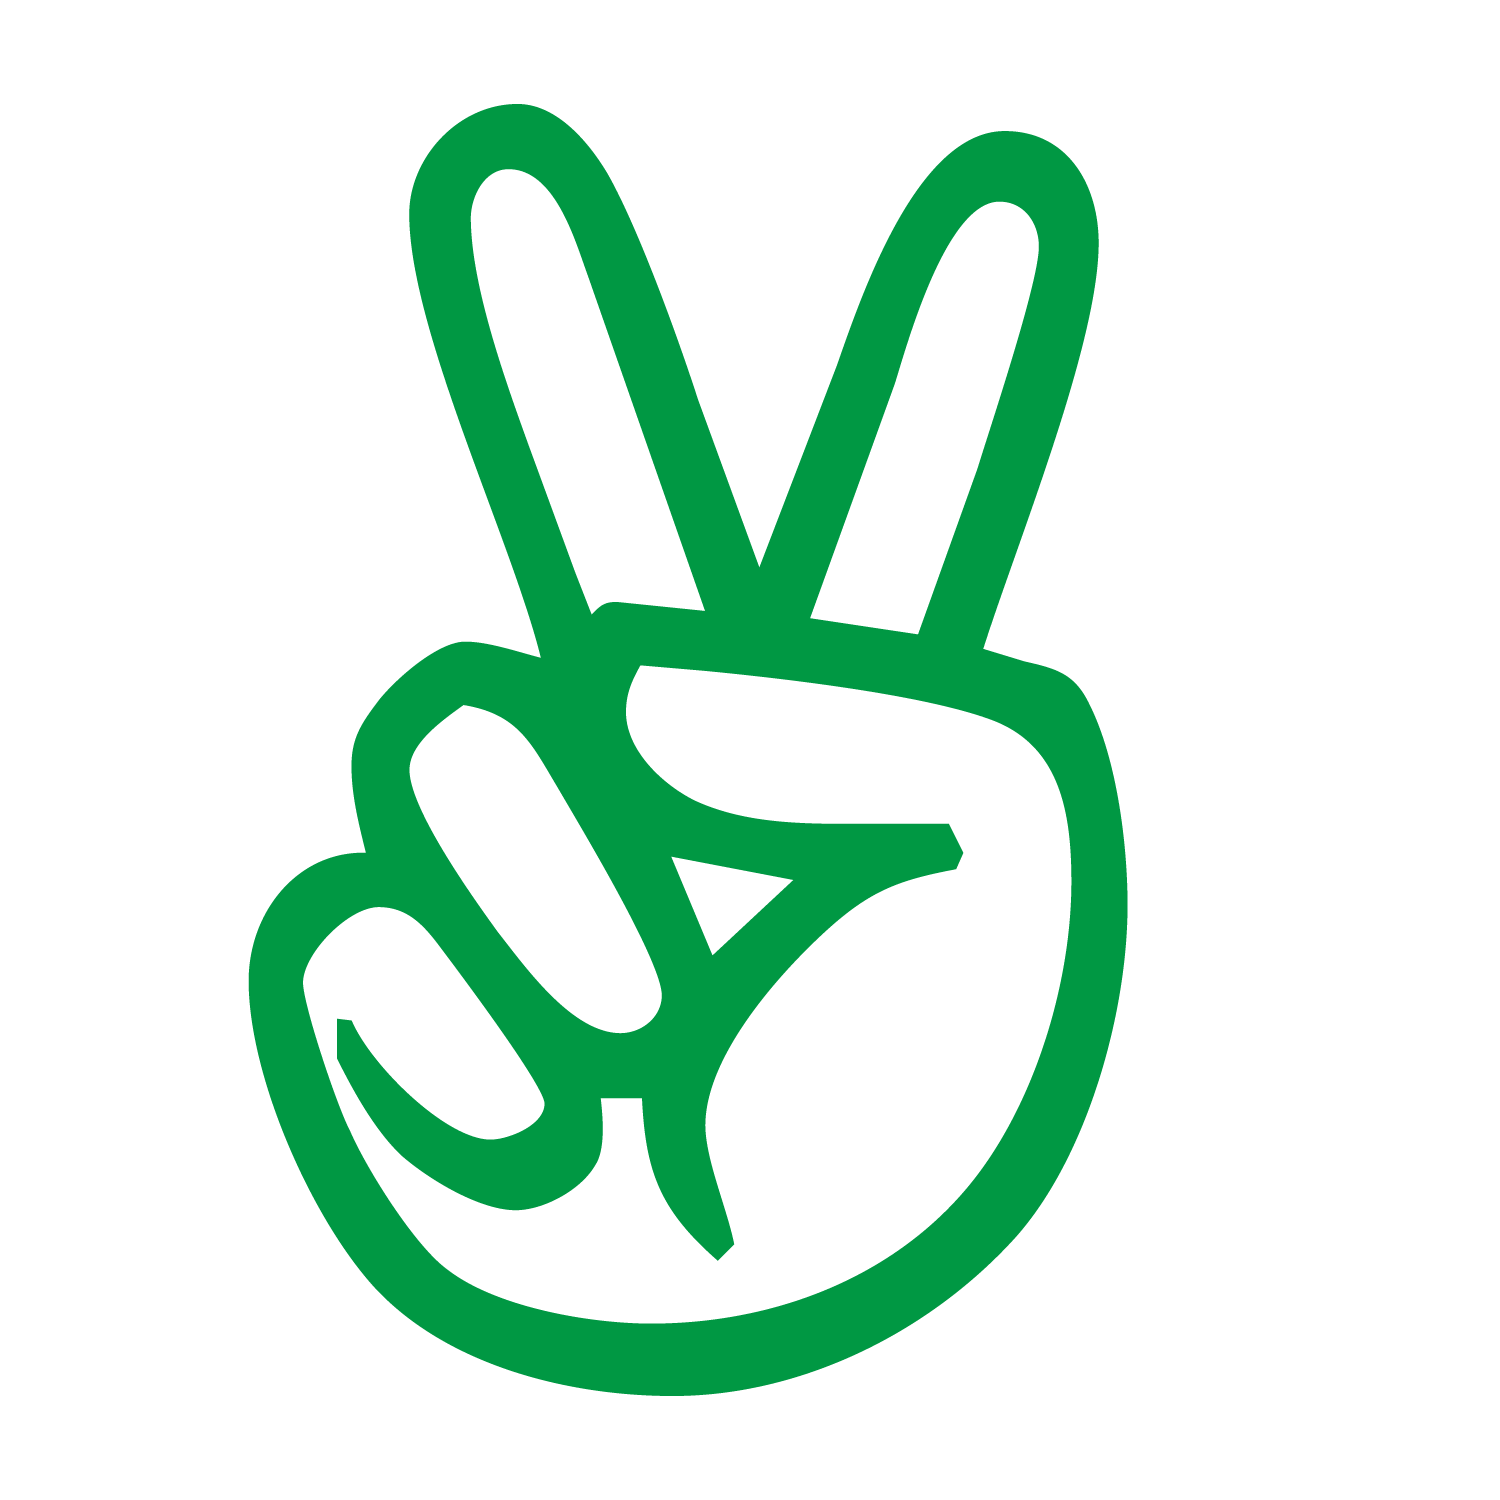 Peace Symbols Hand V Sign Green Yes Gesture Vector Material Png 78120 ...